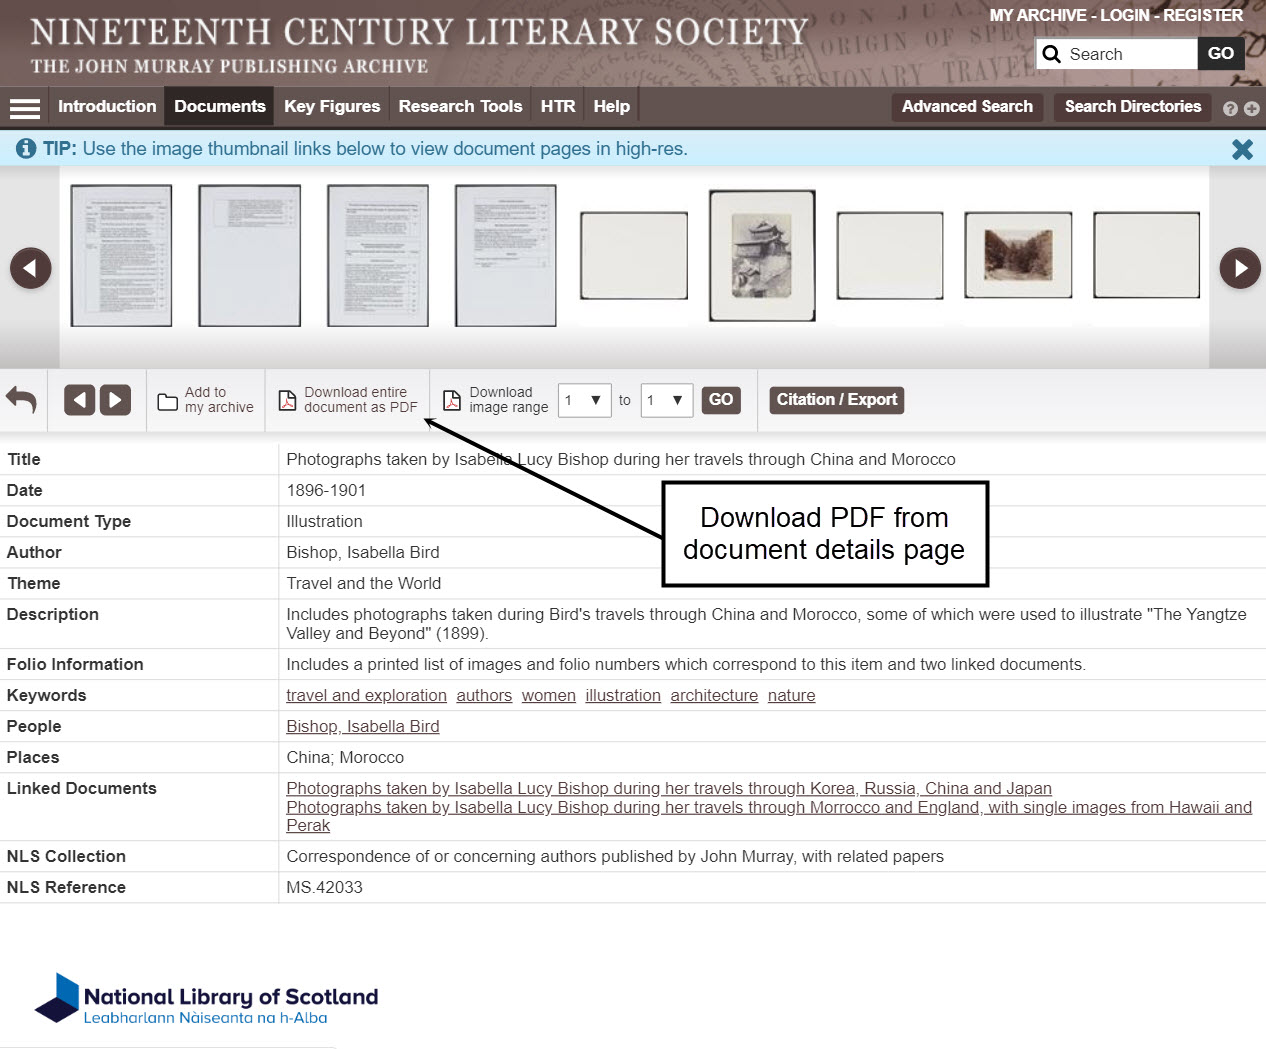 Screenshot of the document details page, with an arrow pointing to the icon for PDF downloads